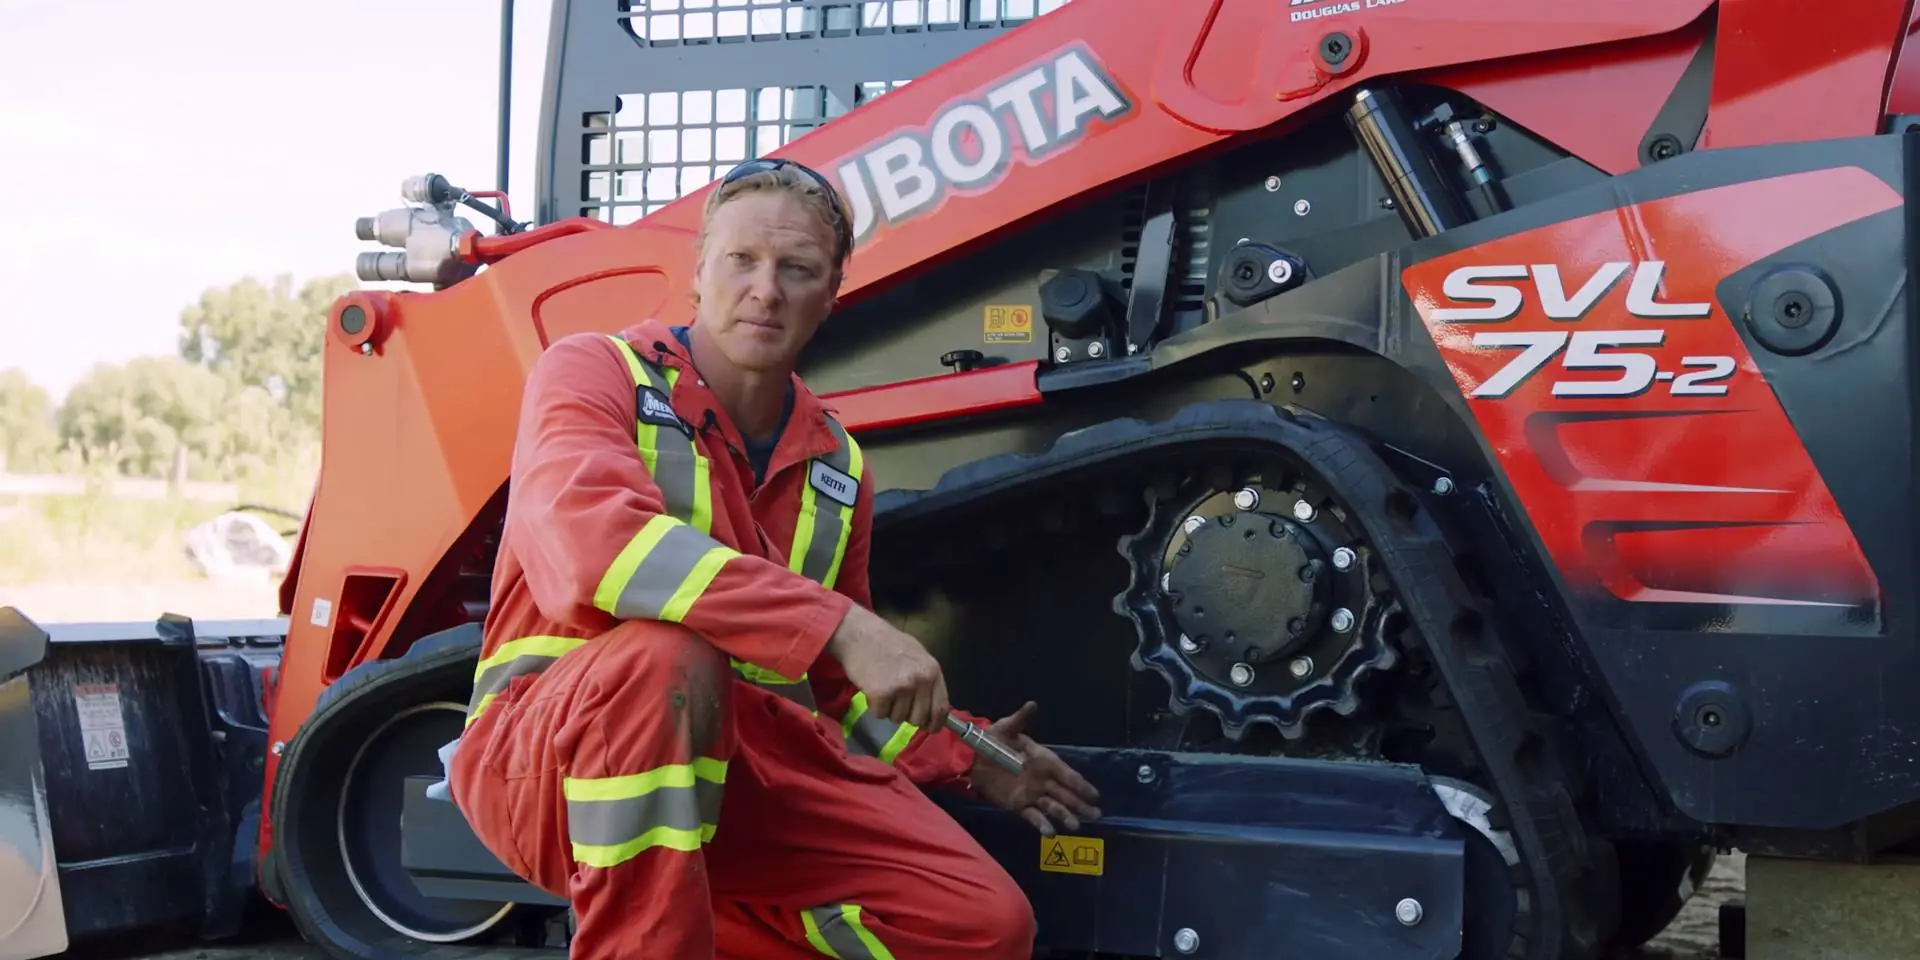 Keith crouched in front of Kubota SVL75-2 about to change the track